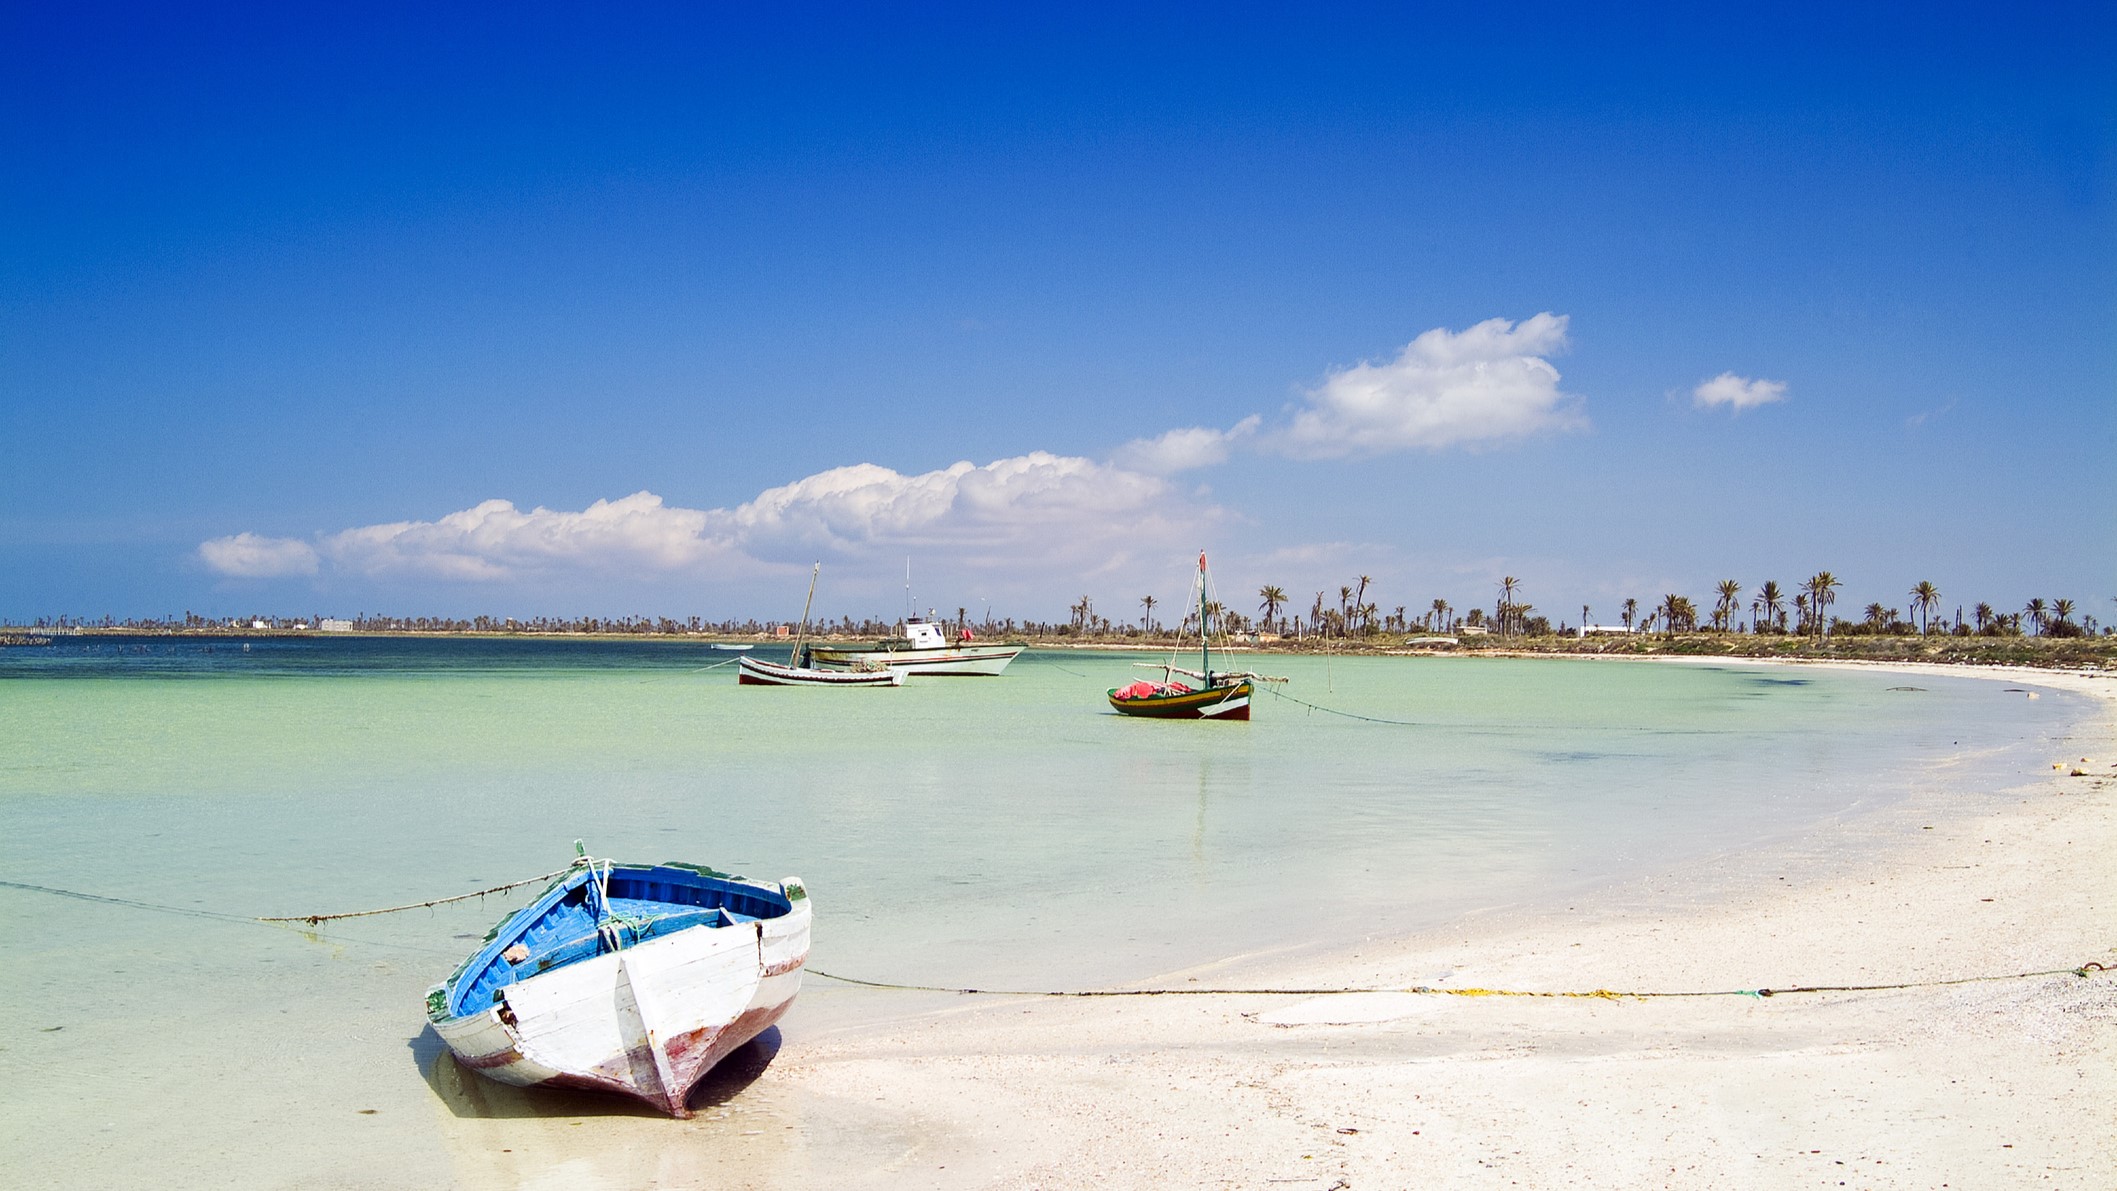 Beach at Chergui island, Kerkennah Islands, Tunisia, North Africa. a small boat is in the foreground moored up to the white sandy beach with blue sky above.